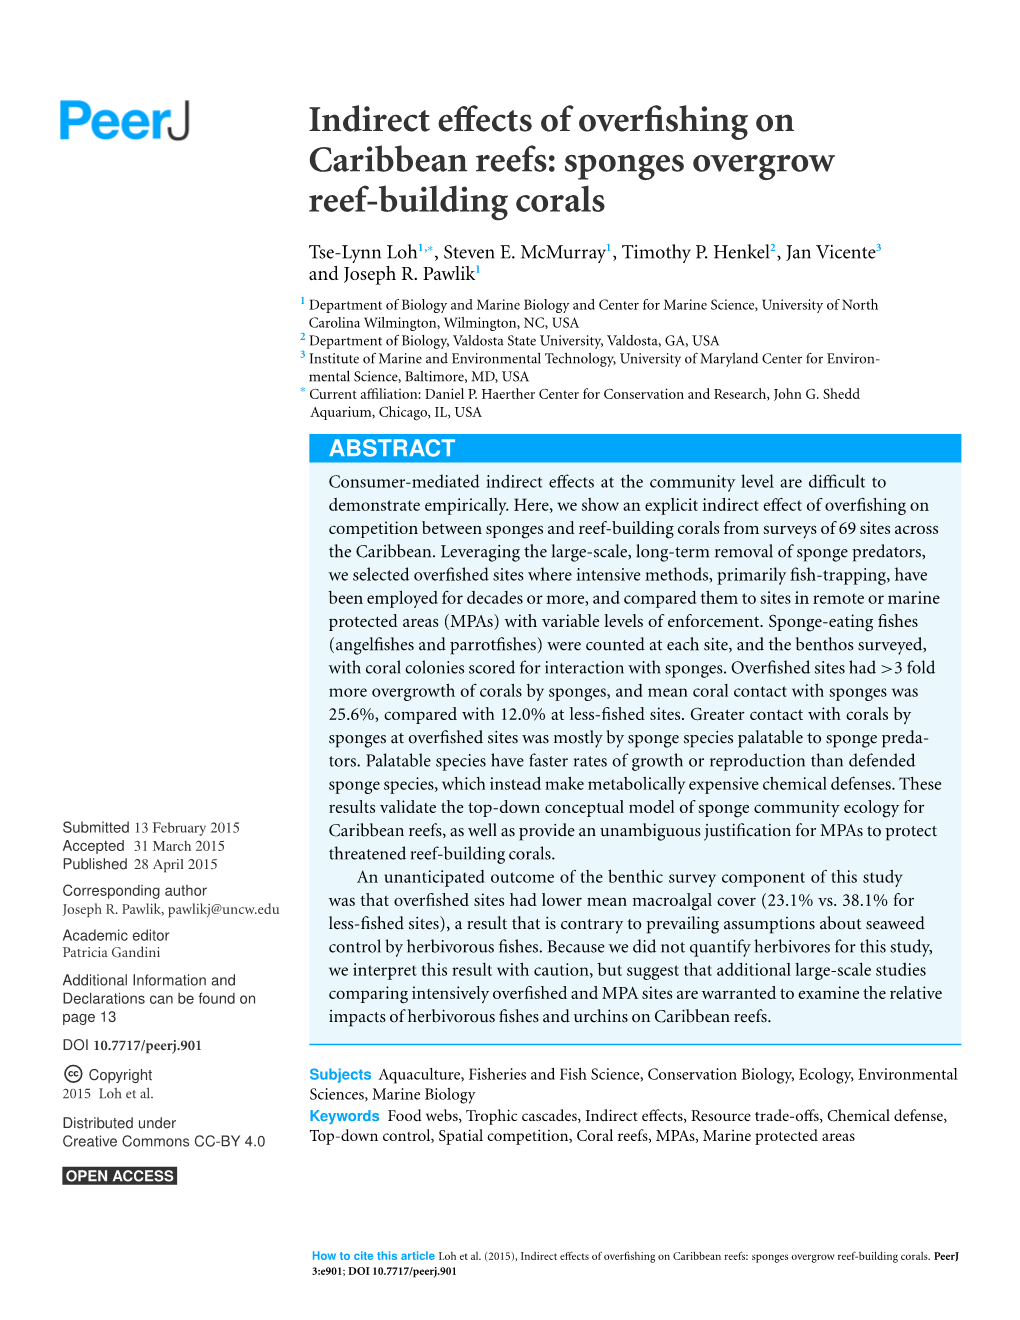 Indirect Effects of Overfishing on Caribbean Reefs: Sponges Overgrow Reef-Building Corals